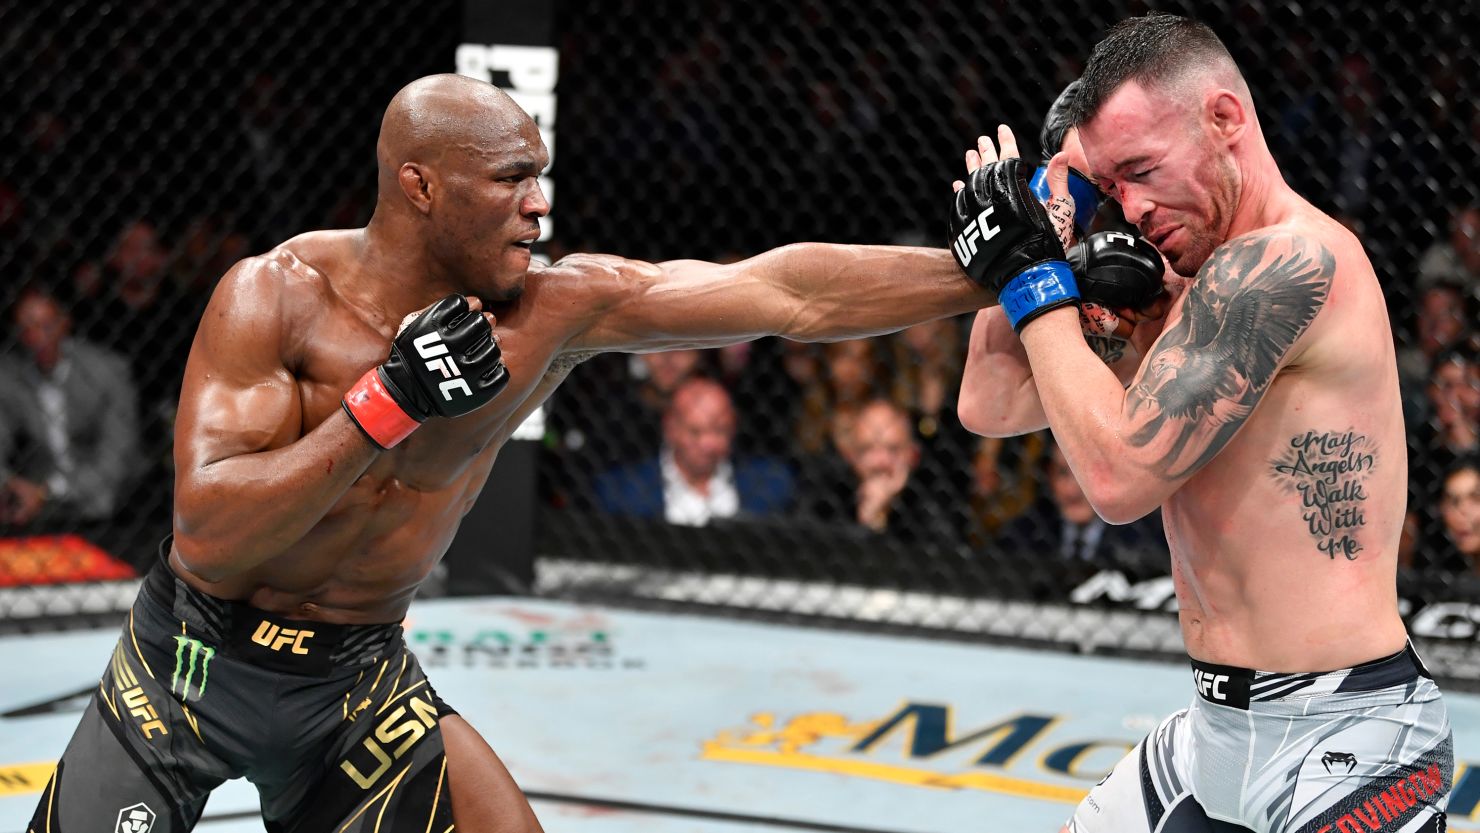 Kamaru Usman of Nigeria punches Colby Covington of the US in their UFC welterweight championship fight during the UFC 268 event at Madison Square Garden.